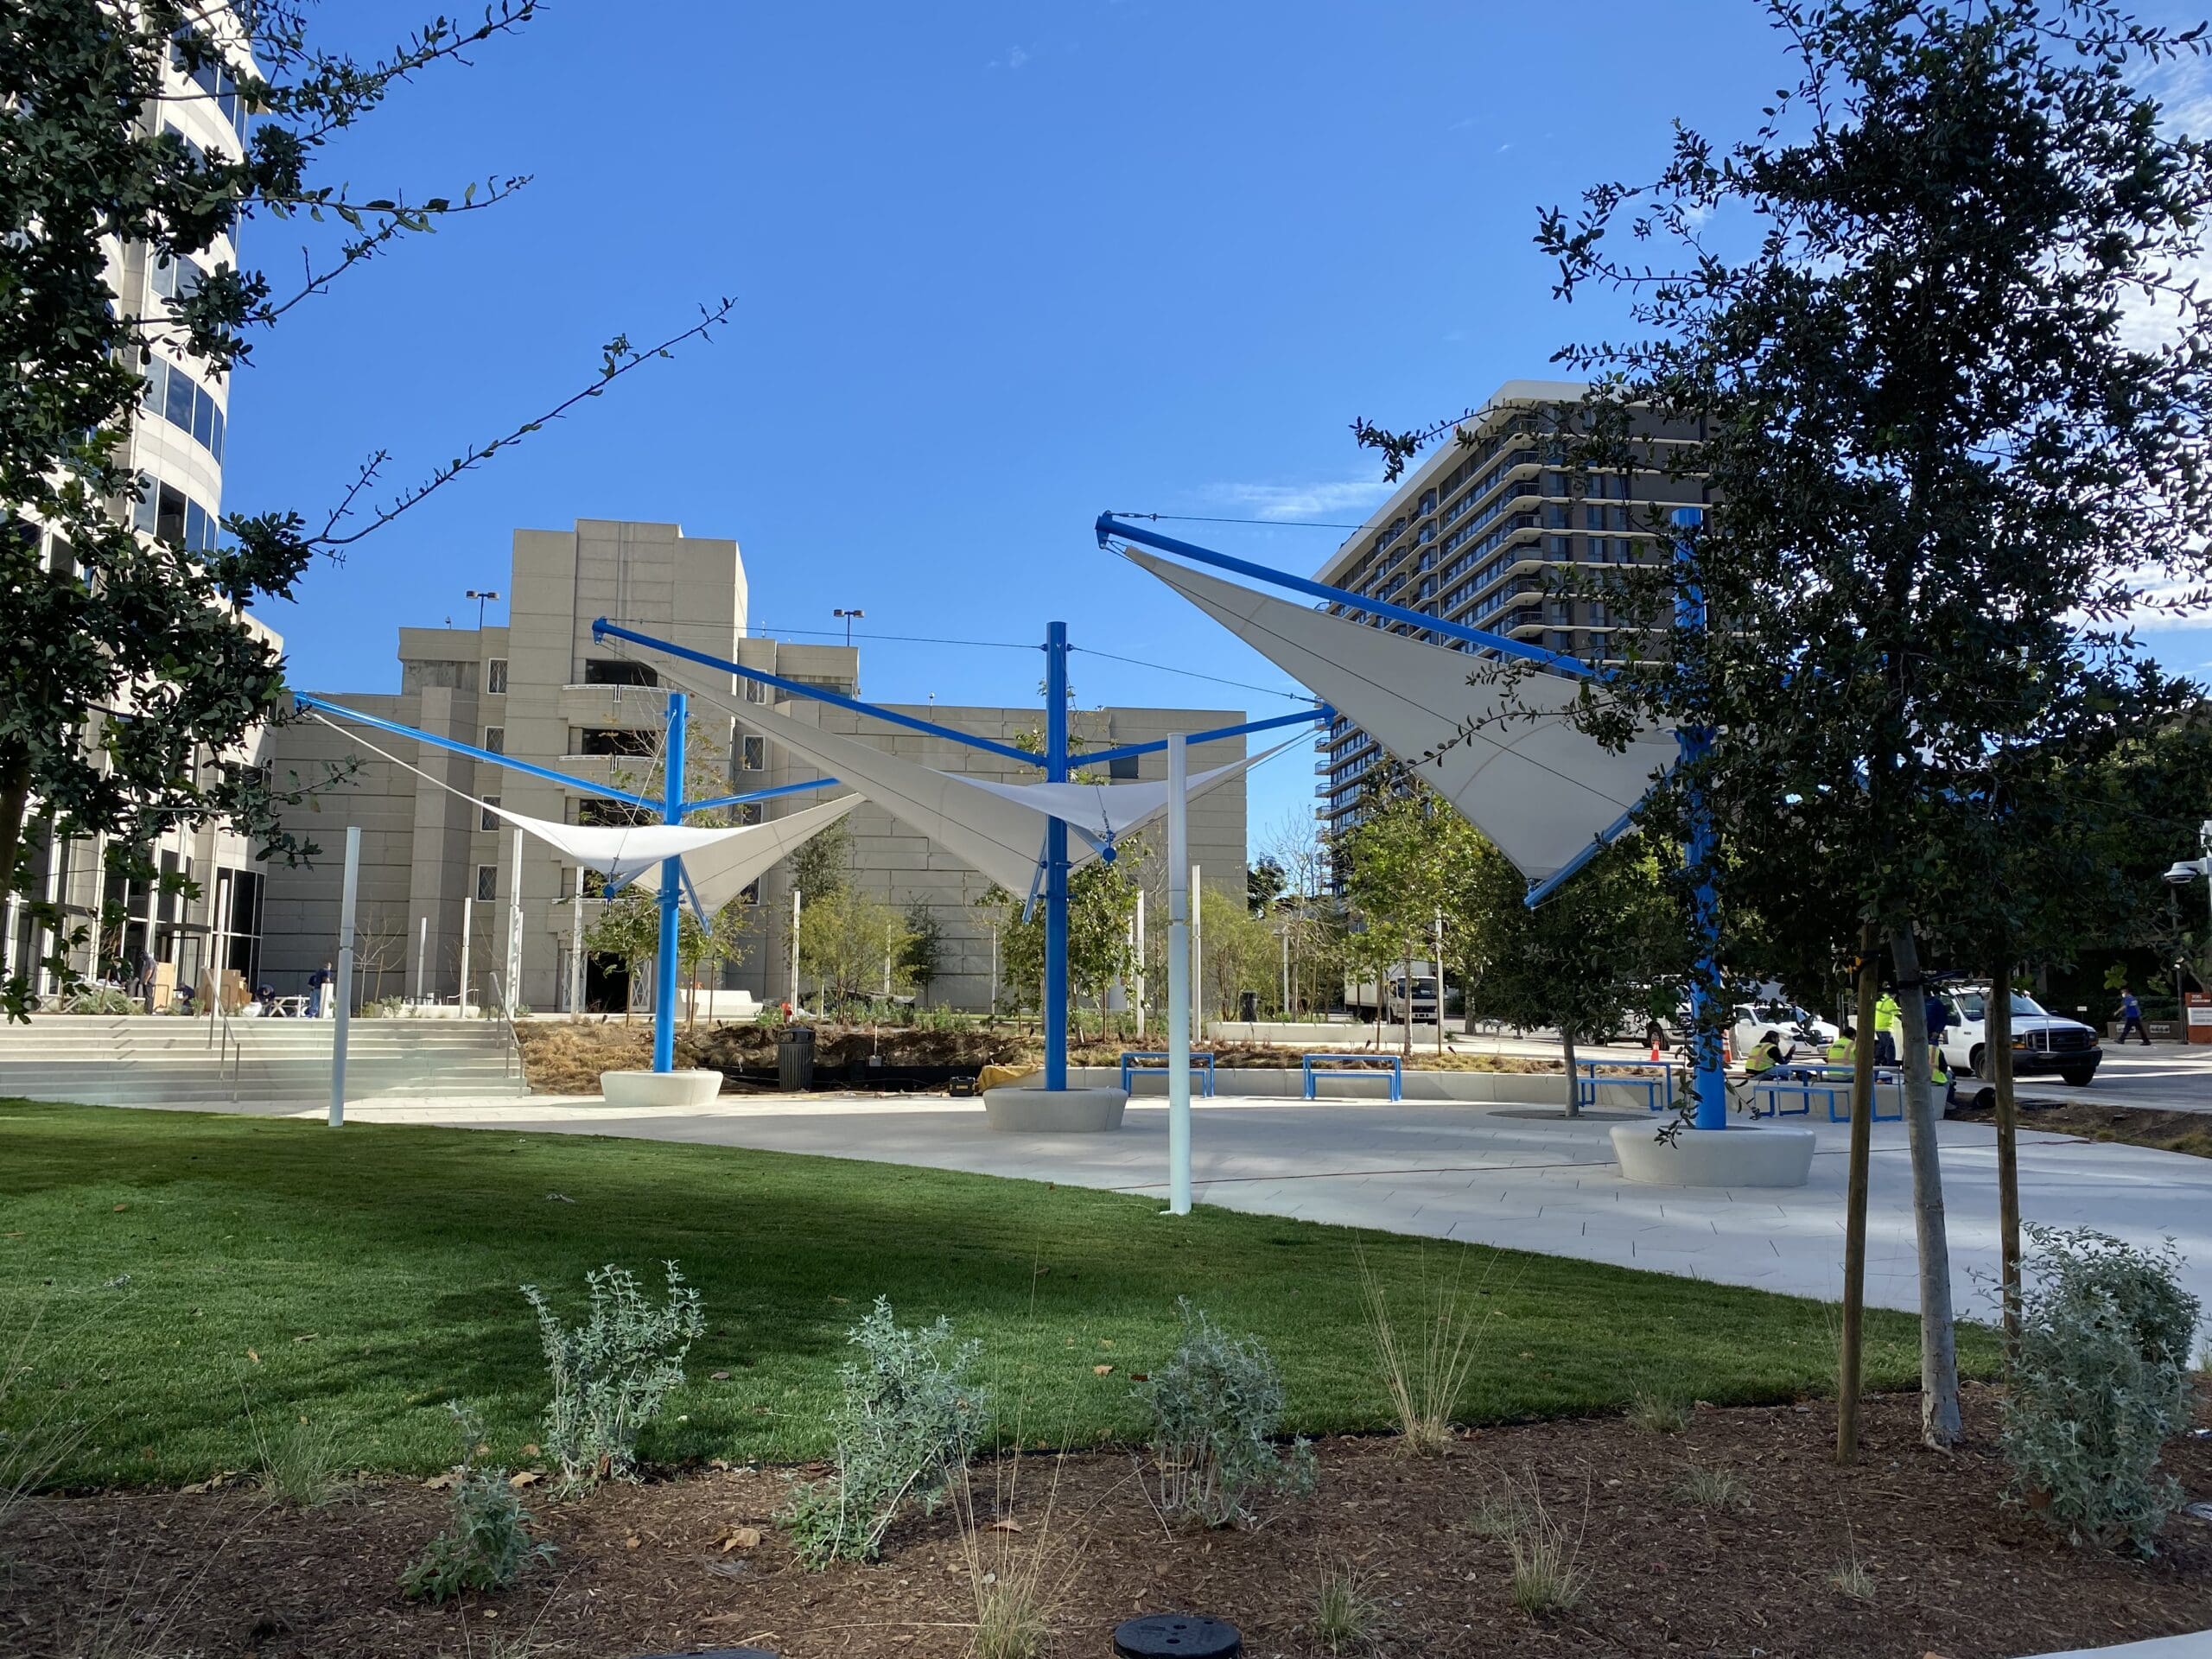 triangle shades next to grass area and trees